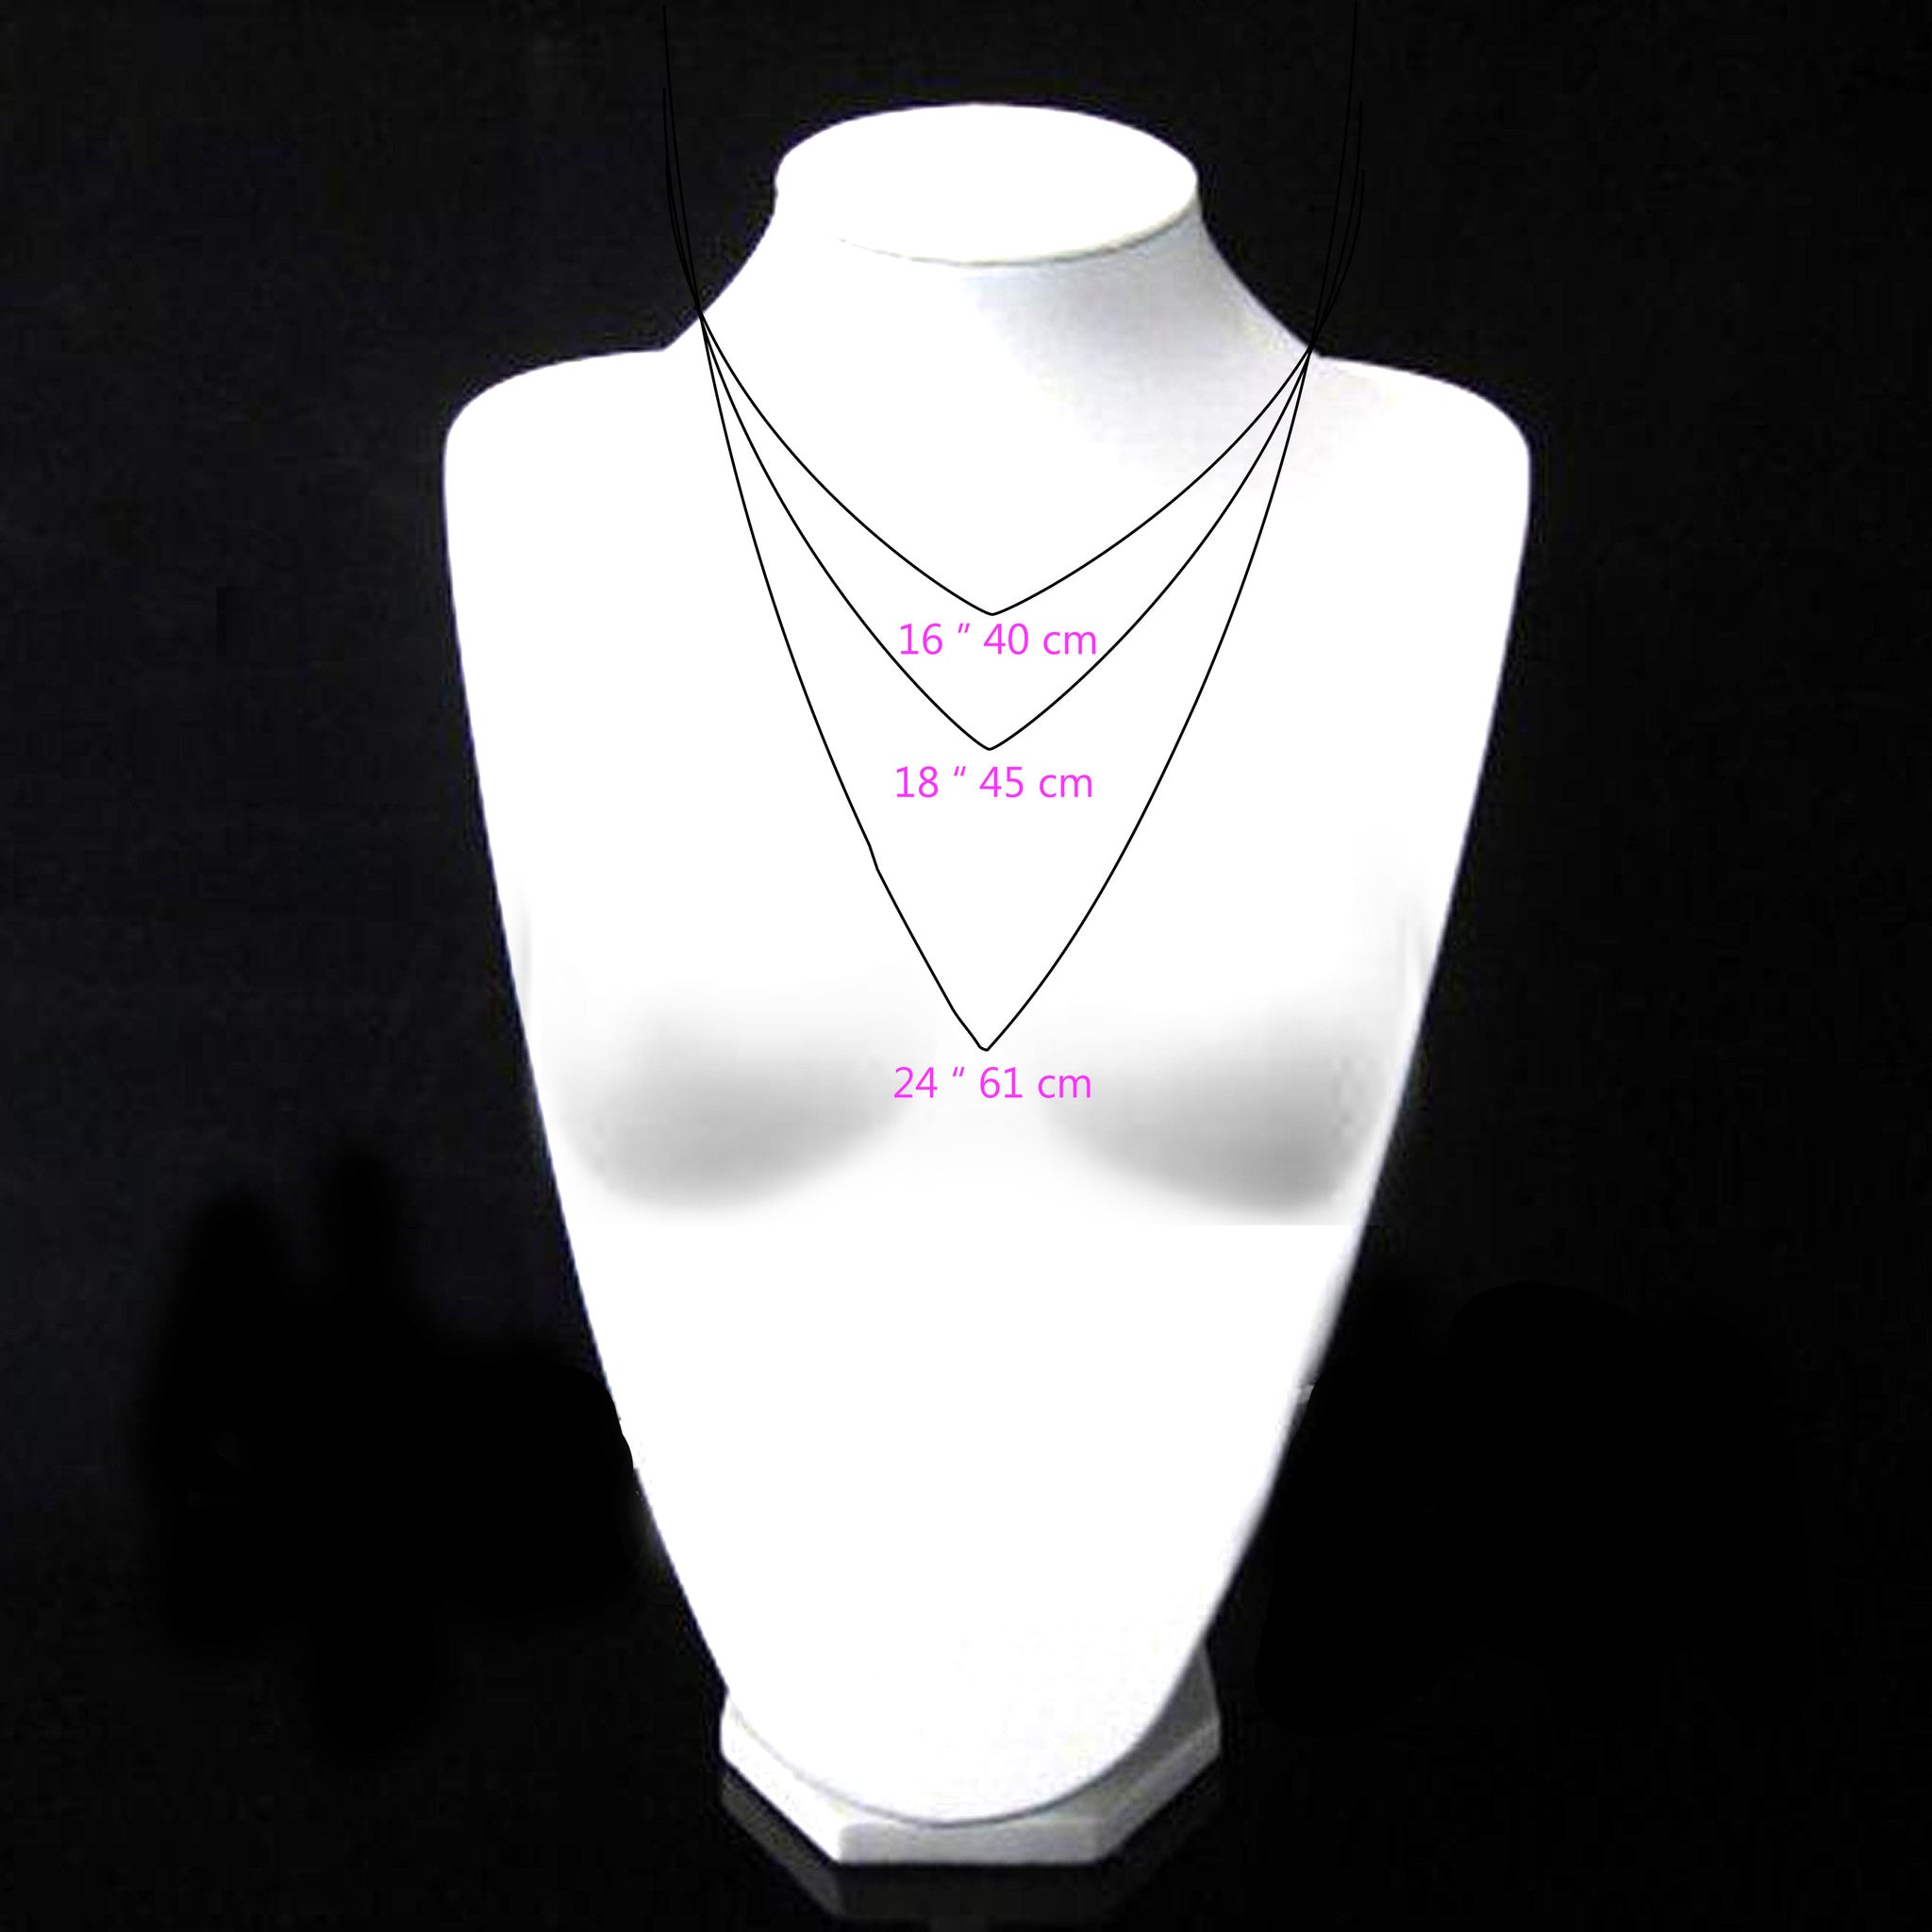 Necklaces - Helen Chain & Gourmet " Smile " Necklace